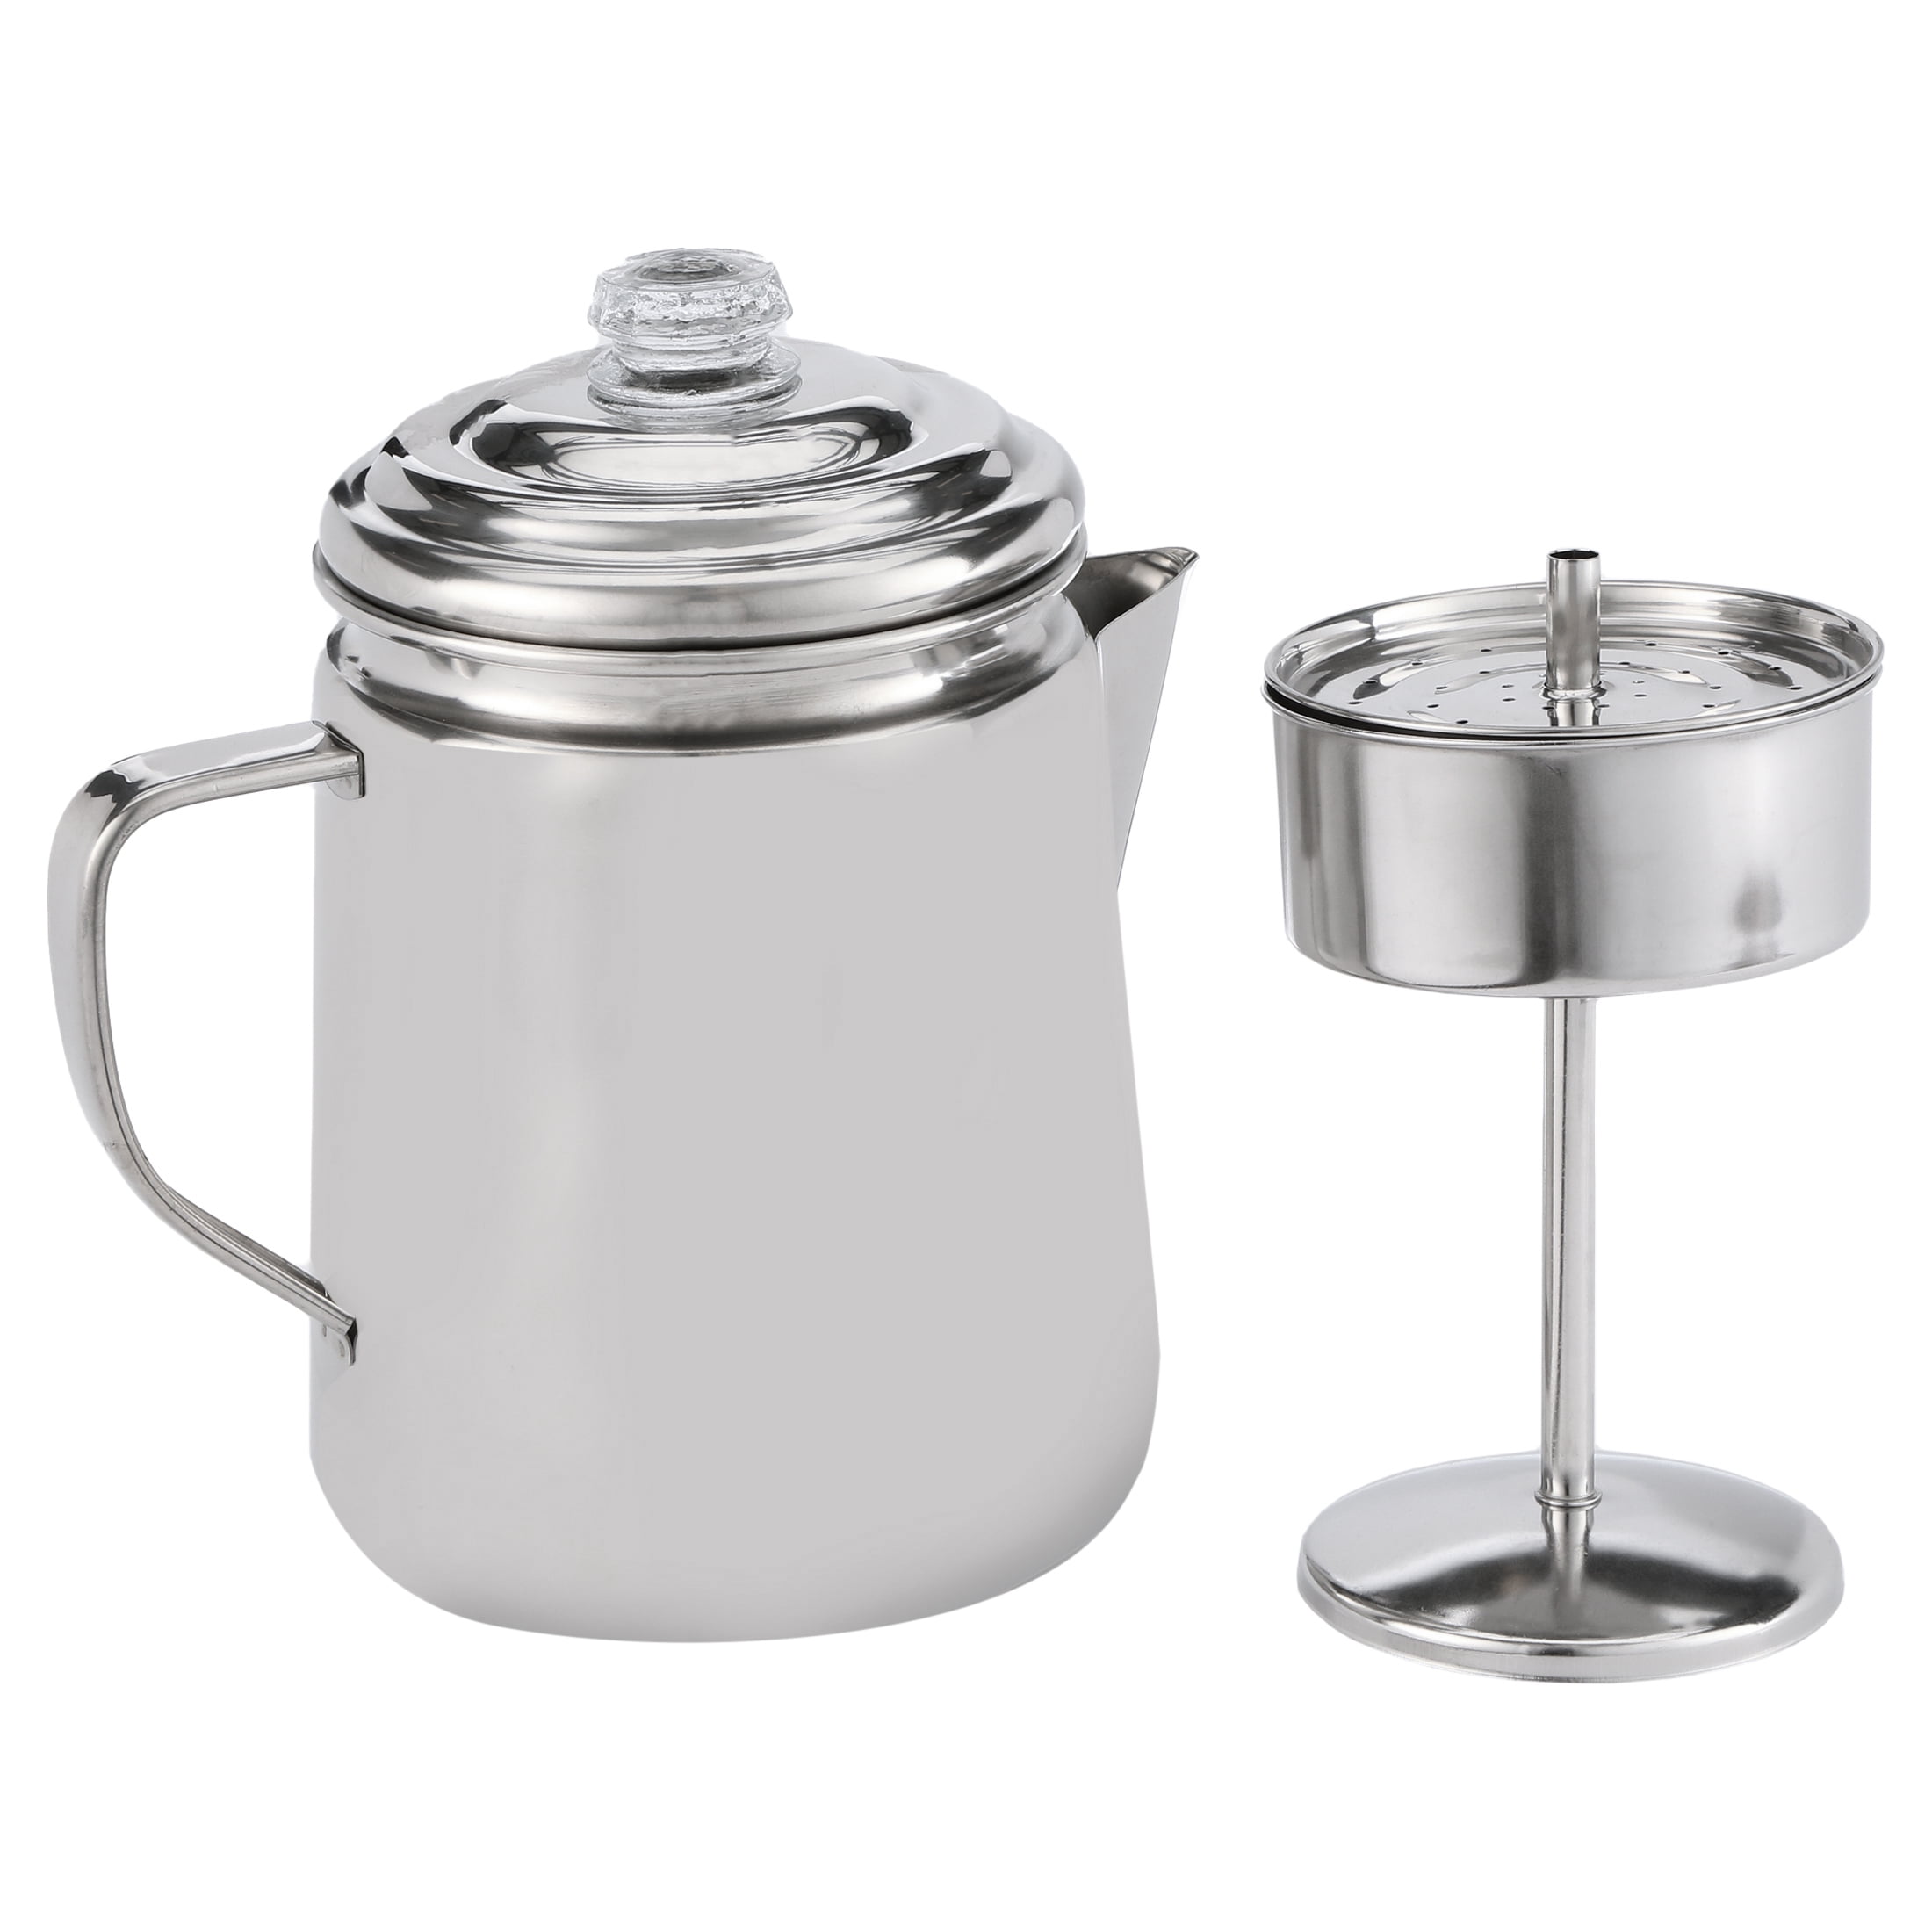 Coleman Stainless Steel Percolator, 12 Cup 